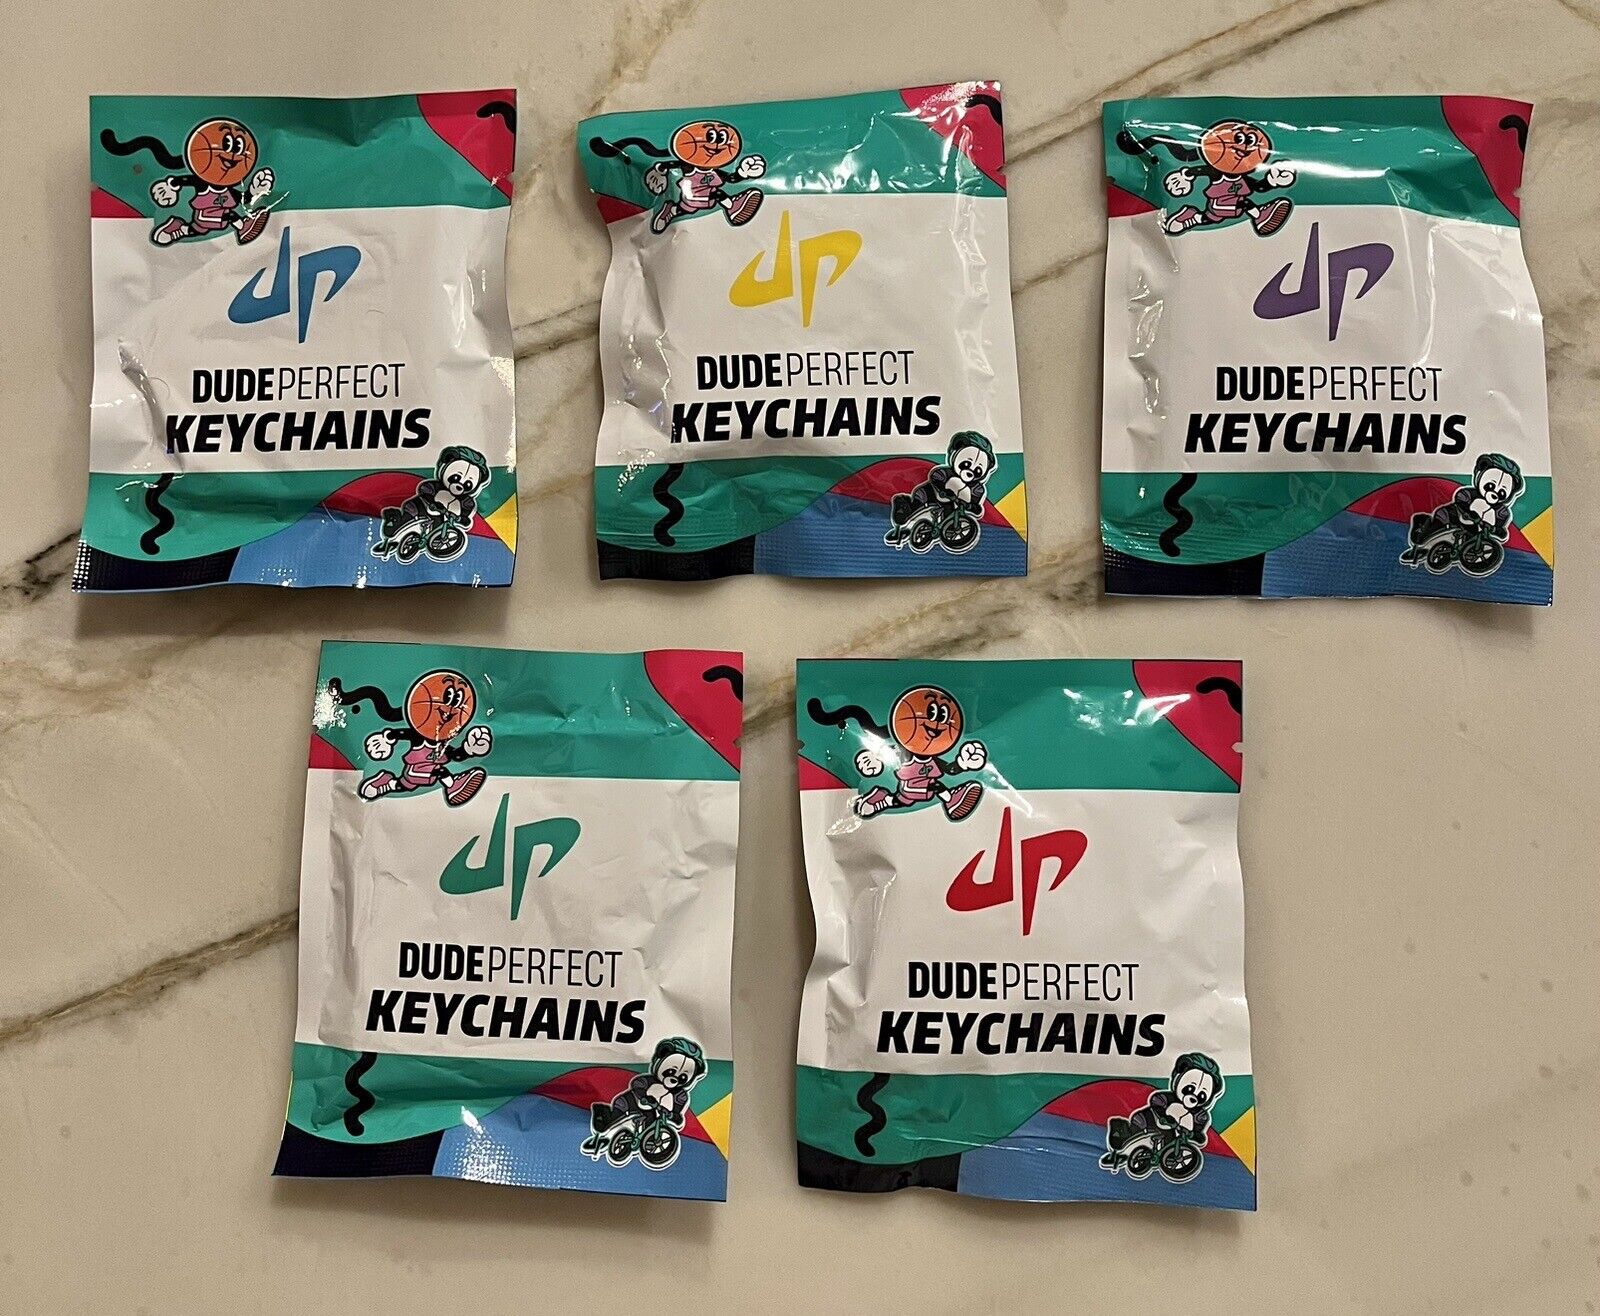 NEW Lot of 5 Dude Perfect Keychains DP Key 011, 012, 013, 014, 015 SEALED